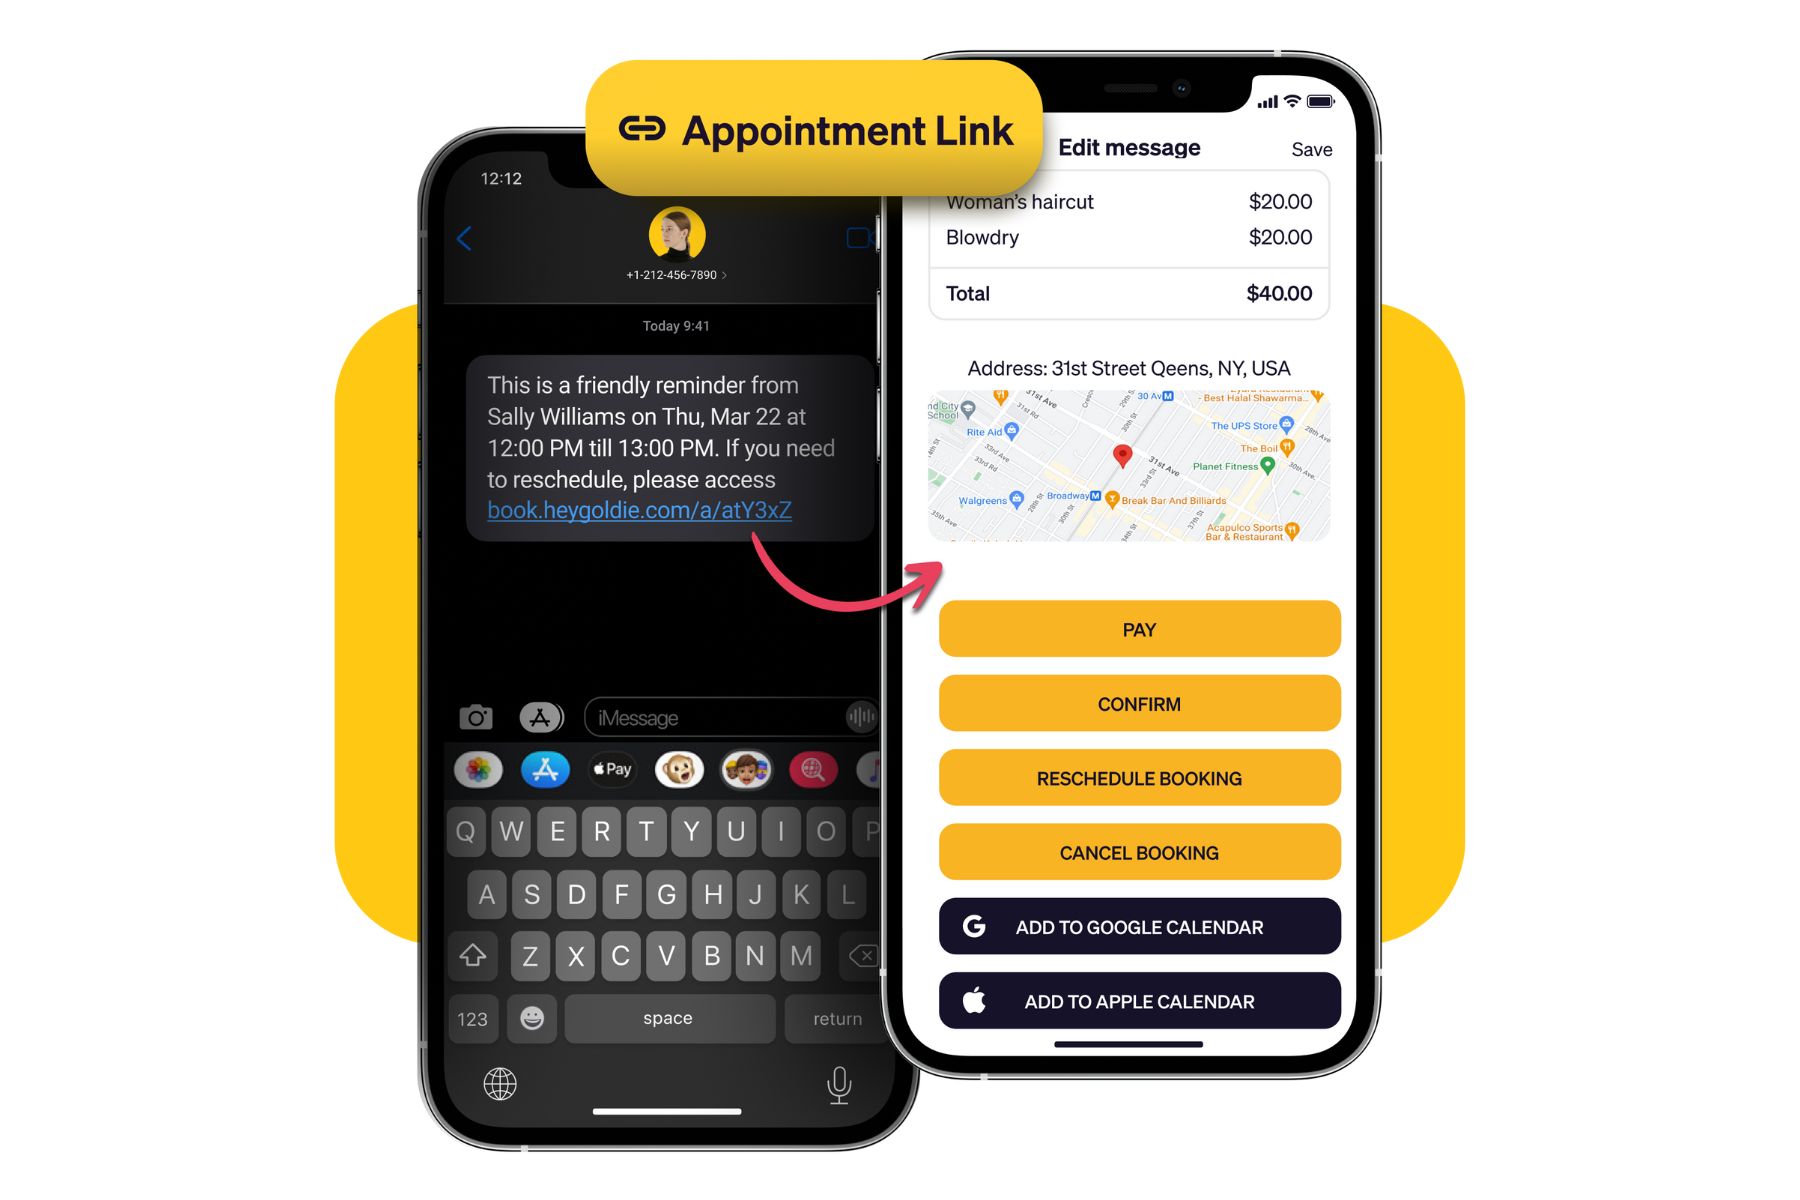 Goldie app: appointment management link